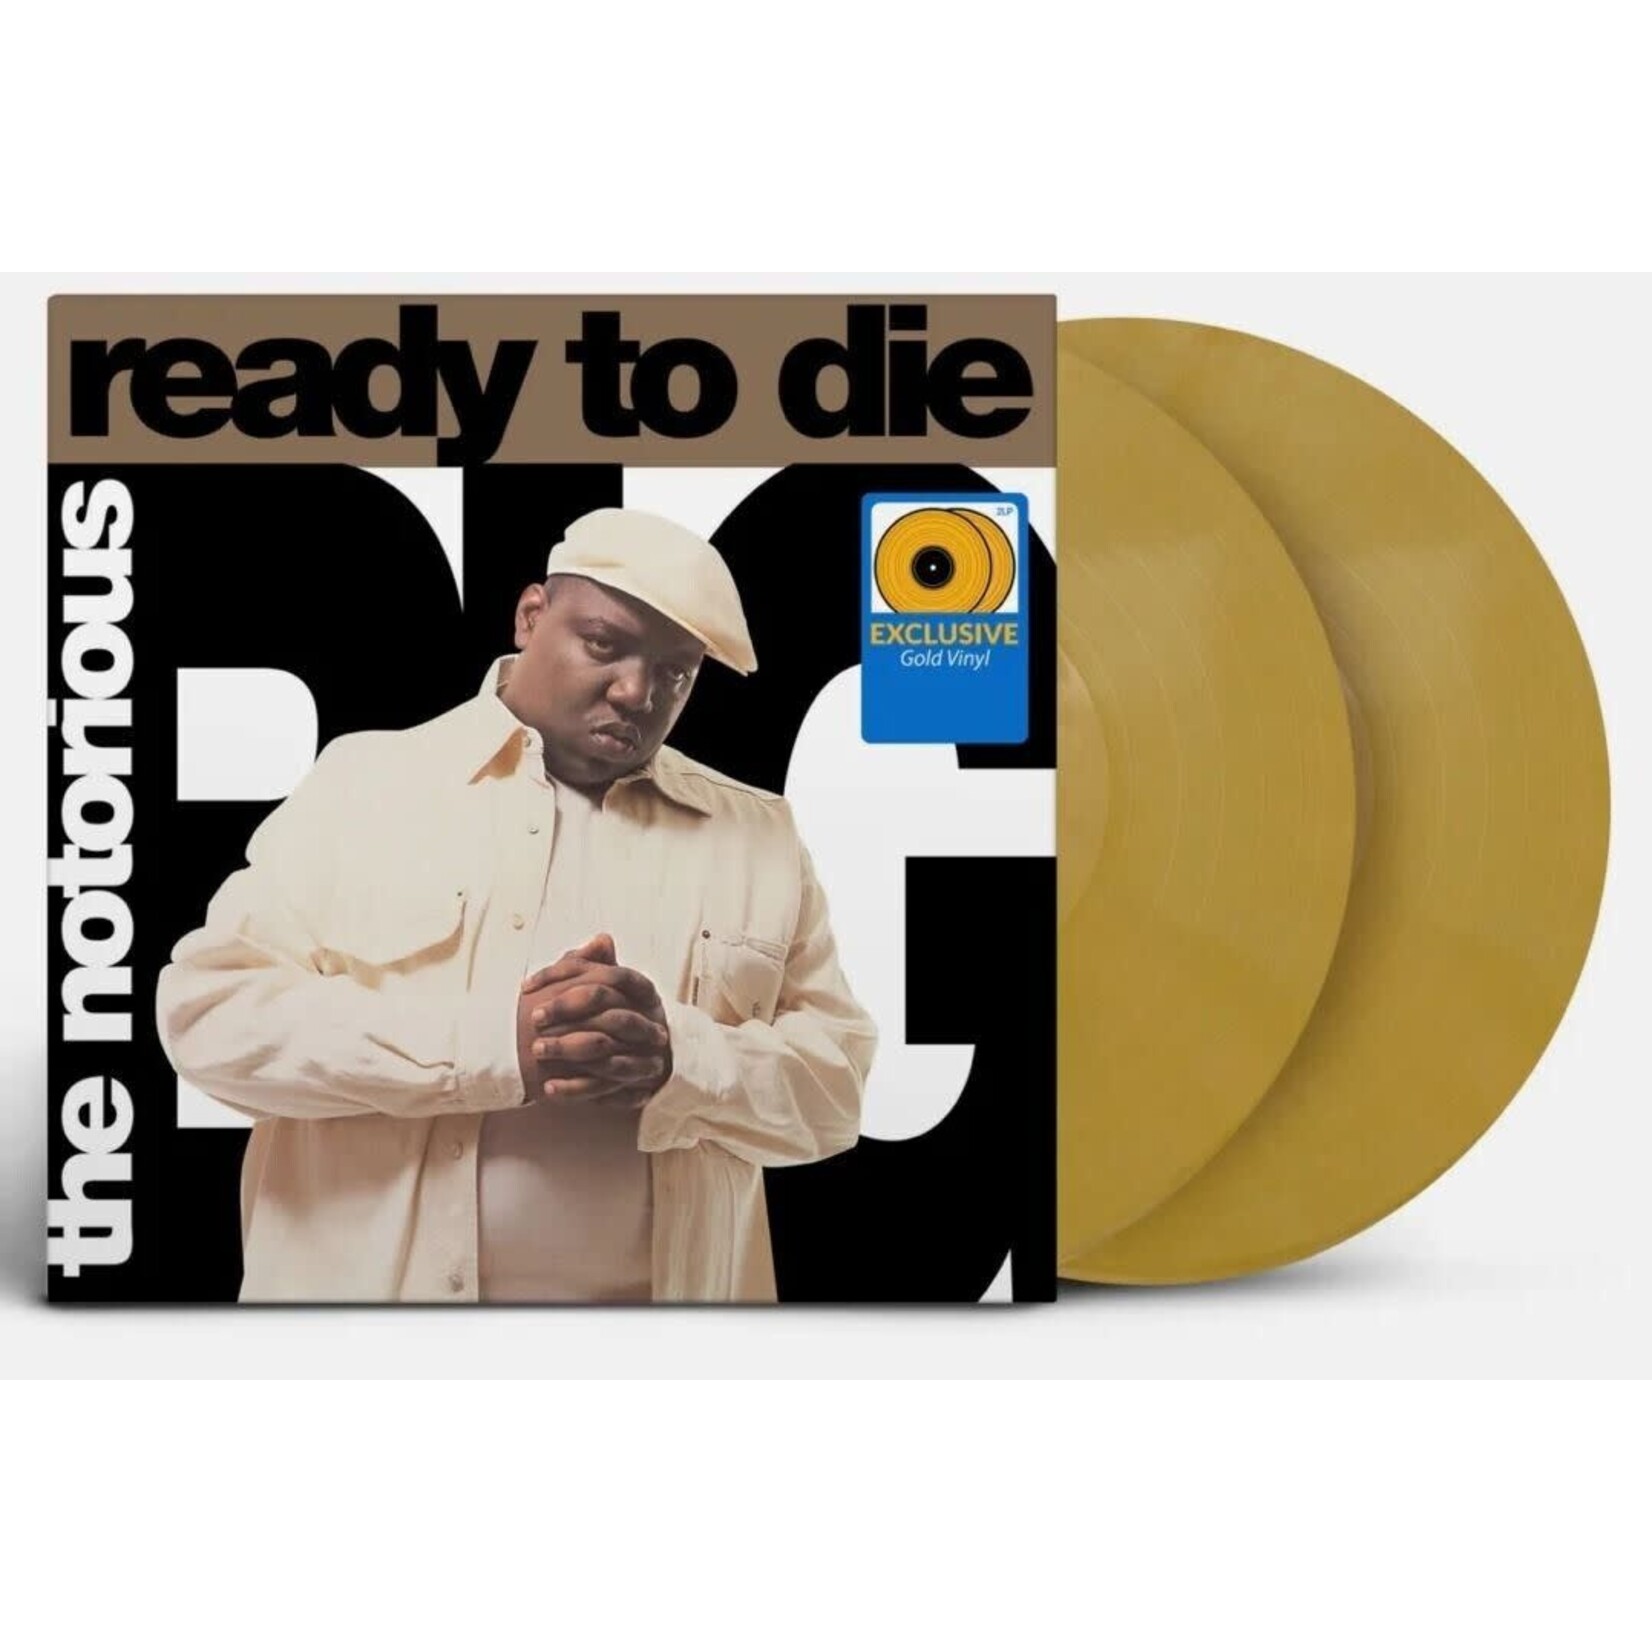 [New] Notorious B.I.G - Ready To Die (2LP, gold vinyl)